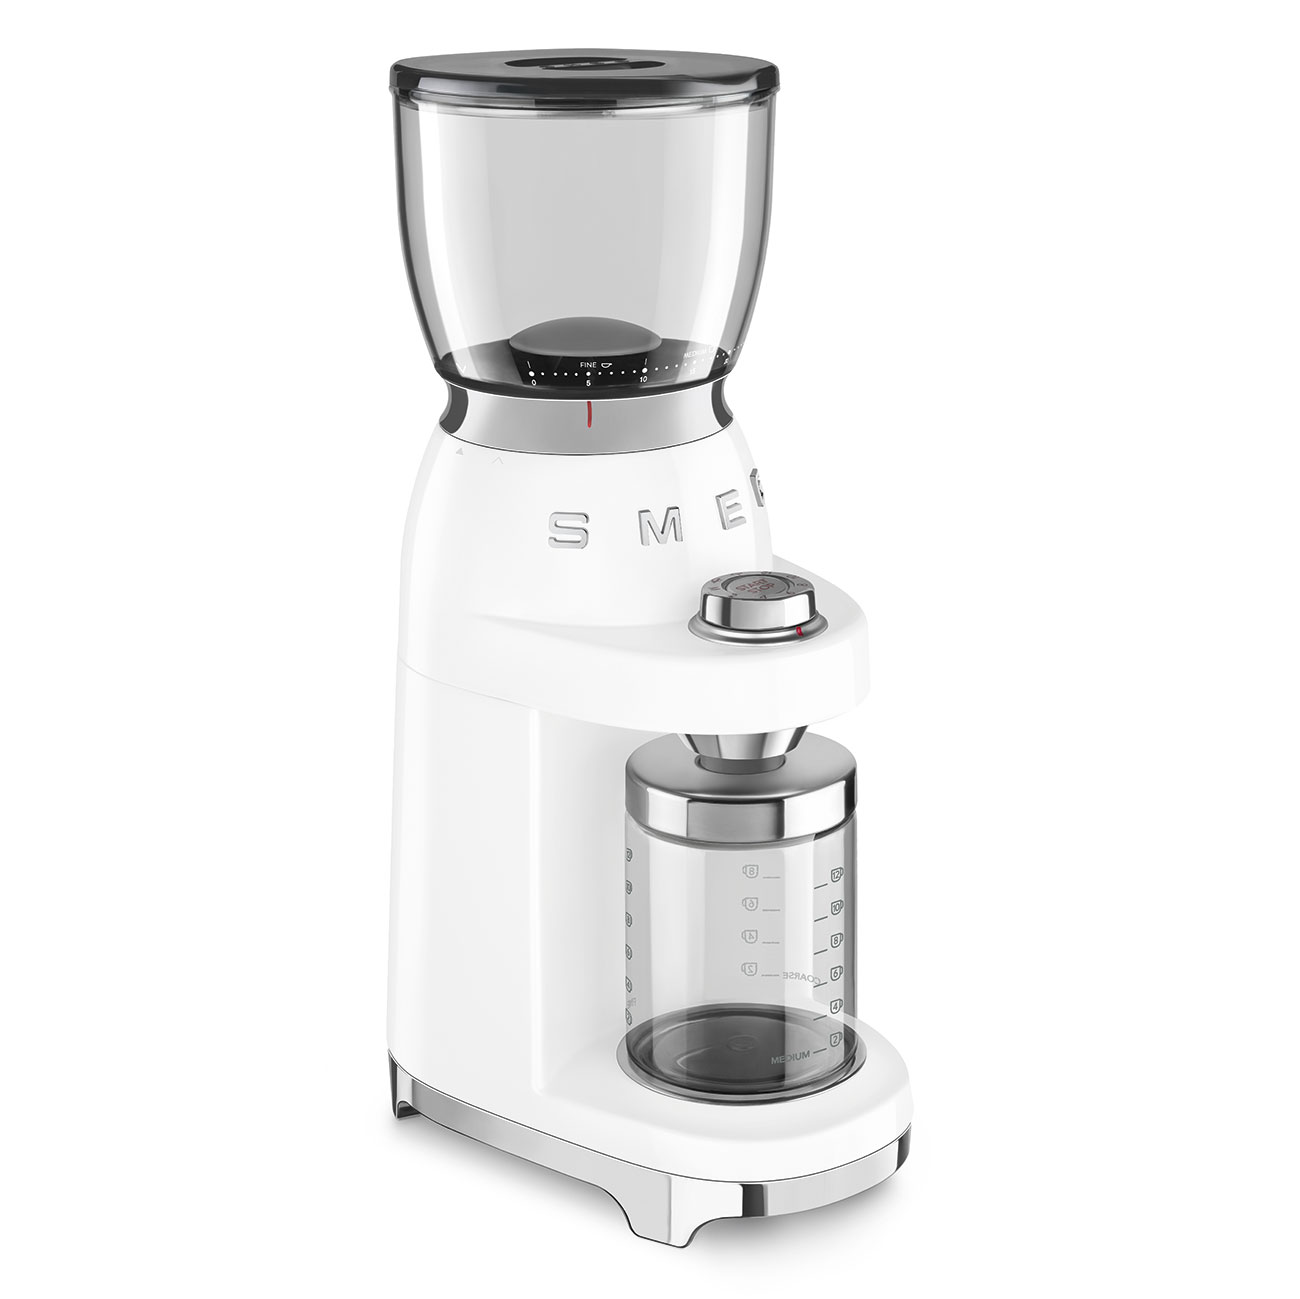 White Coffee Grinder featuring a conical burr - CGF11WHUK - Smeg_4